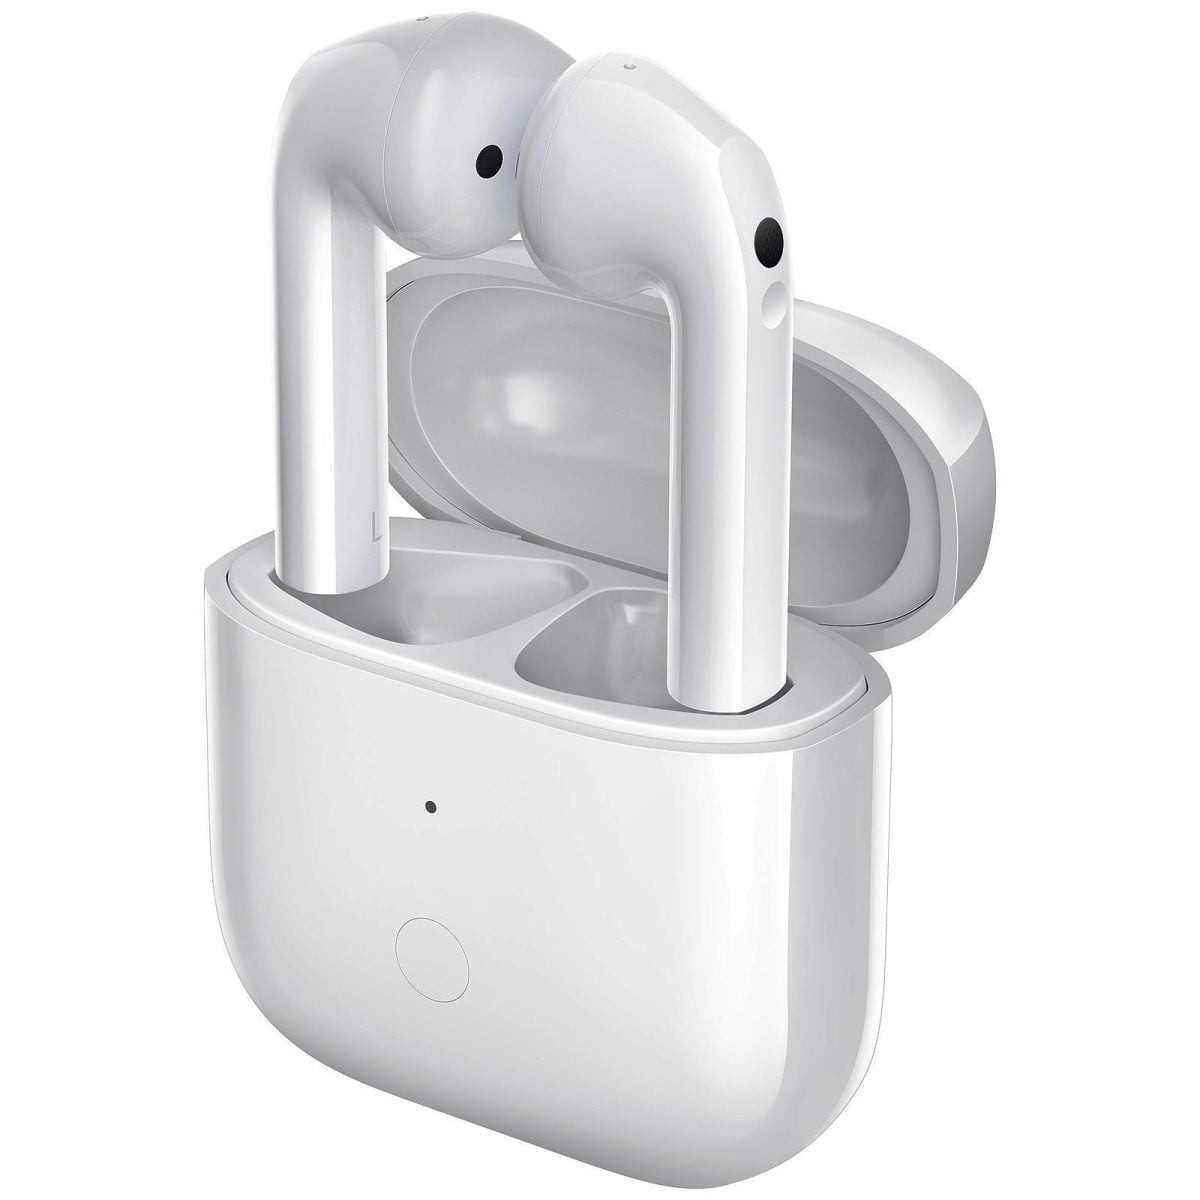 Ld0005916929 1 &Amp;Lt;H1&Amp;Gt;Redmi Buds 3 Bluetooth Earbuds - White&Amp;Lt;/H1&Amp;Gt; &Amp;Lt;Span Class=&Amp;Quot;Xm-Text F-Medium &Amp;Quot; Data-Key=&Amp;Quot;Slogan_1&Amp;Quot; Data-Type=&Amp;Quot;Text&Amp;Quot; Data-Id=&Amp;Quot;A934C620C7&Amp;Quot;&Amp;Gt;Dive Into The Beat Lightweight&Amp;Lt;/Span&Amp;Gt;&Amp;Lt;Span Class=&Amp;Quot;Xm-Text F-Light &Amp;Quot; Data-Key=&Amp;Quot;Ksp_1&Amp;Quot; Data-Type=&Amp;Quot;Text&Amp;Quot; Data-Id=&Amp;Quot;1Acf2B92C6&Amp;Quot;&Amp;Gt;, Semi In-Ear Earbuds | High-Resolution Sound Quality | Dual-Microphone Noise Cancellation For Calls | Extra-Long 20-Hour Battery Life. &Amp;Lt;Span Class=&Amp;Quot;Xm-Text F-Bold &Amp;Quot; Data-Key=&Amp;Quot;Ksp_2&Amp;Quot; Data-Type=&Amp;Quot;Text&Amp;Quot; Data-Id=&Amp;Quot;737550A742&Amp;Quot;&Amp;Gt;Lightweight, Semi In-Ear Design Each&Amp;Lt;/Span&Amp;Gt; Earbud Weighs Only 4.5G.&Amp;Lt;Span Class=&Amp;Quot;Xm-Text F-Bold &Amp;Quot; Data-Key=&Amp;Quot;Ksp_4&Amp;Quot; Data-Type=&Amp;Quot;Text&Amp;Quot; Data-Id=&Amp;Quot;1E3Aa7Ee6F&Amp;Quot;&Amp;Gt;Qualcomm® Qcc3040 Bluetooth® Chip Set &Amp;Lt;/Span&Amp;Gt;Low Power Consumption, Long Battery Life.&Amp;Lt;Span Class=&Amp;Quot;Xm-Text F-Bold &Amp;Quot; Data-Key=&Amp;Quot;Ksp_6&Amp;Quot; Data-Type=&Amp;Quot;Text&Amp;Quot; Data-Id=&Amp;Quot;Cb7Bb07971&Amp;Quot;&Amp;Gt;12Mm Dynamic Driver &Amp;Lt;/Span&Amp;Gt;High-Resolution Sound Quality, For More Natural Detail.&Amp;Lt;Span Class=&Amp;Quot;Xm-Text F-Bold &Amp;Quot; Data-Key=&Amp;Quot;Ksp_8&Amp;Quot; Data-Type=&Amp;Quot;Text&Amp;Quot; Data-Id=&Amp;Quot;26B1Fc16E4&Amp;Quot;&Amp;Gt;Qualcomm® Cvc™ Echo Cancelling And Noise Suppression Technology &Amp;Lt;/Span&Amp;Gt;Crystal Clear Voice Calls&Amp;Lt;/Span&Amp;Gt; Redmi Redmi Buds 3 Bluetooth Earbuds - White